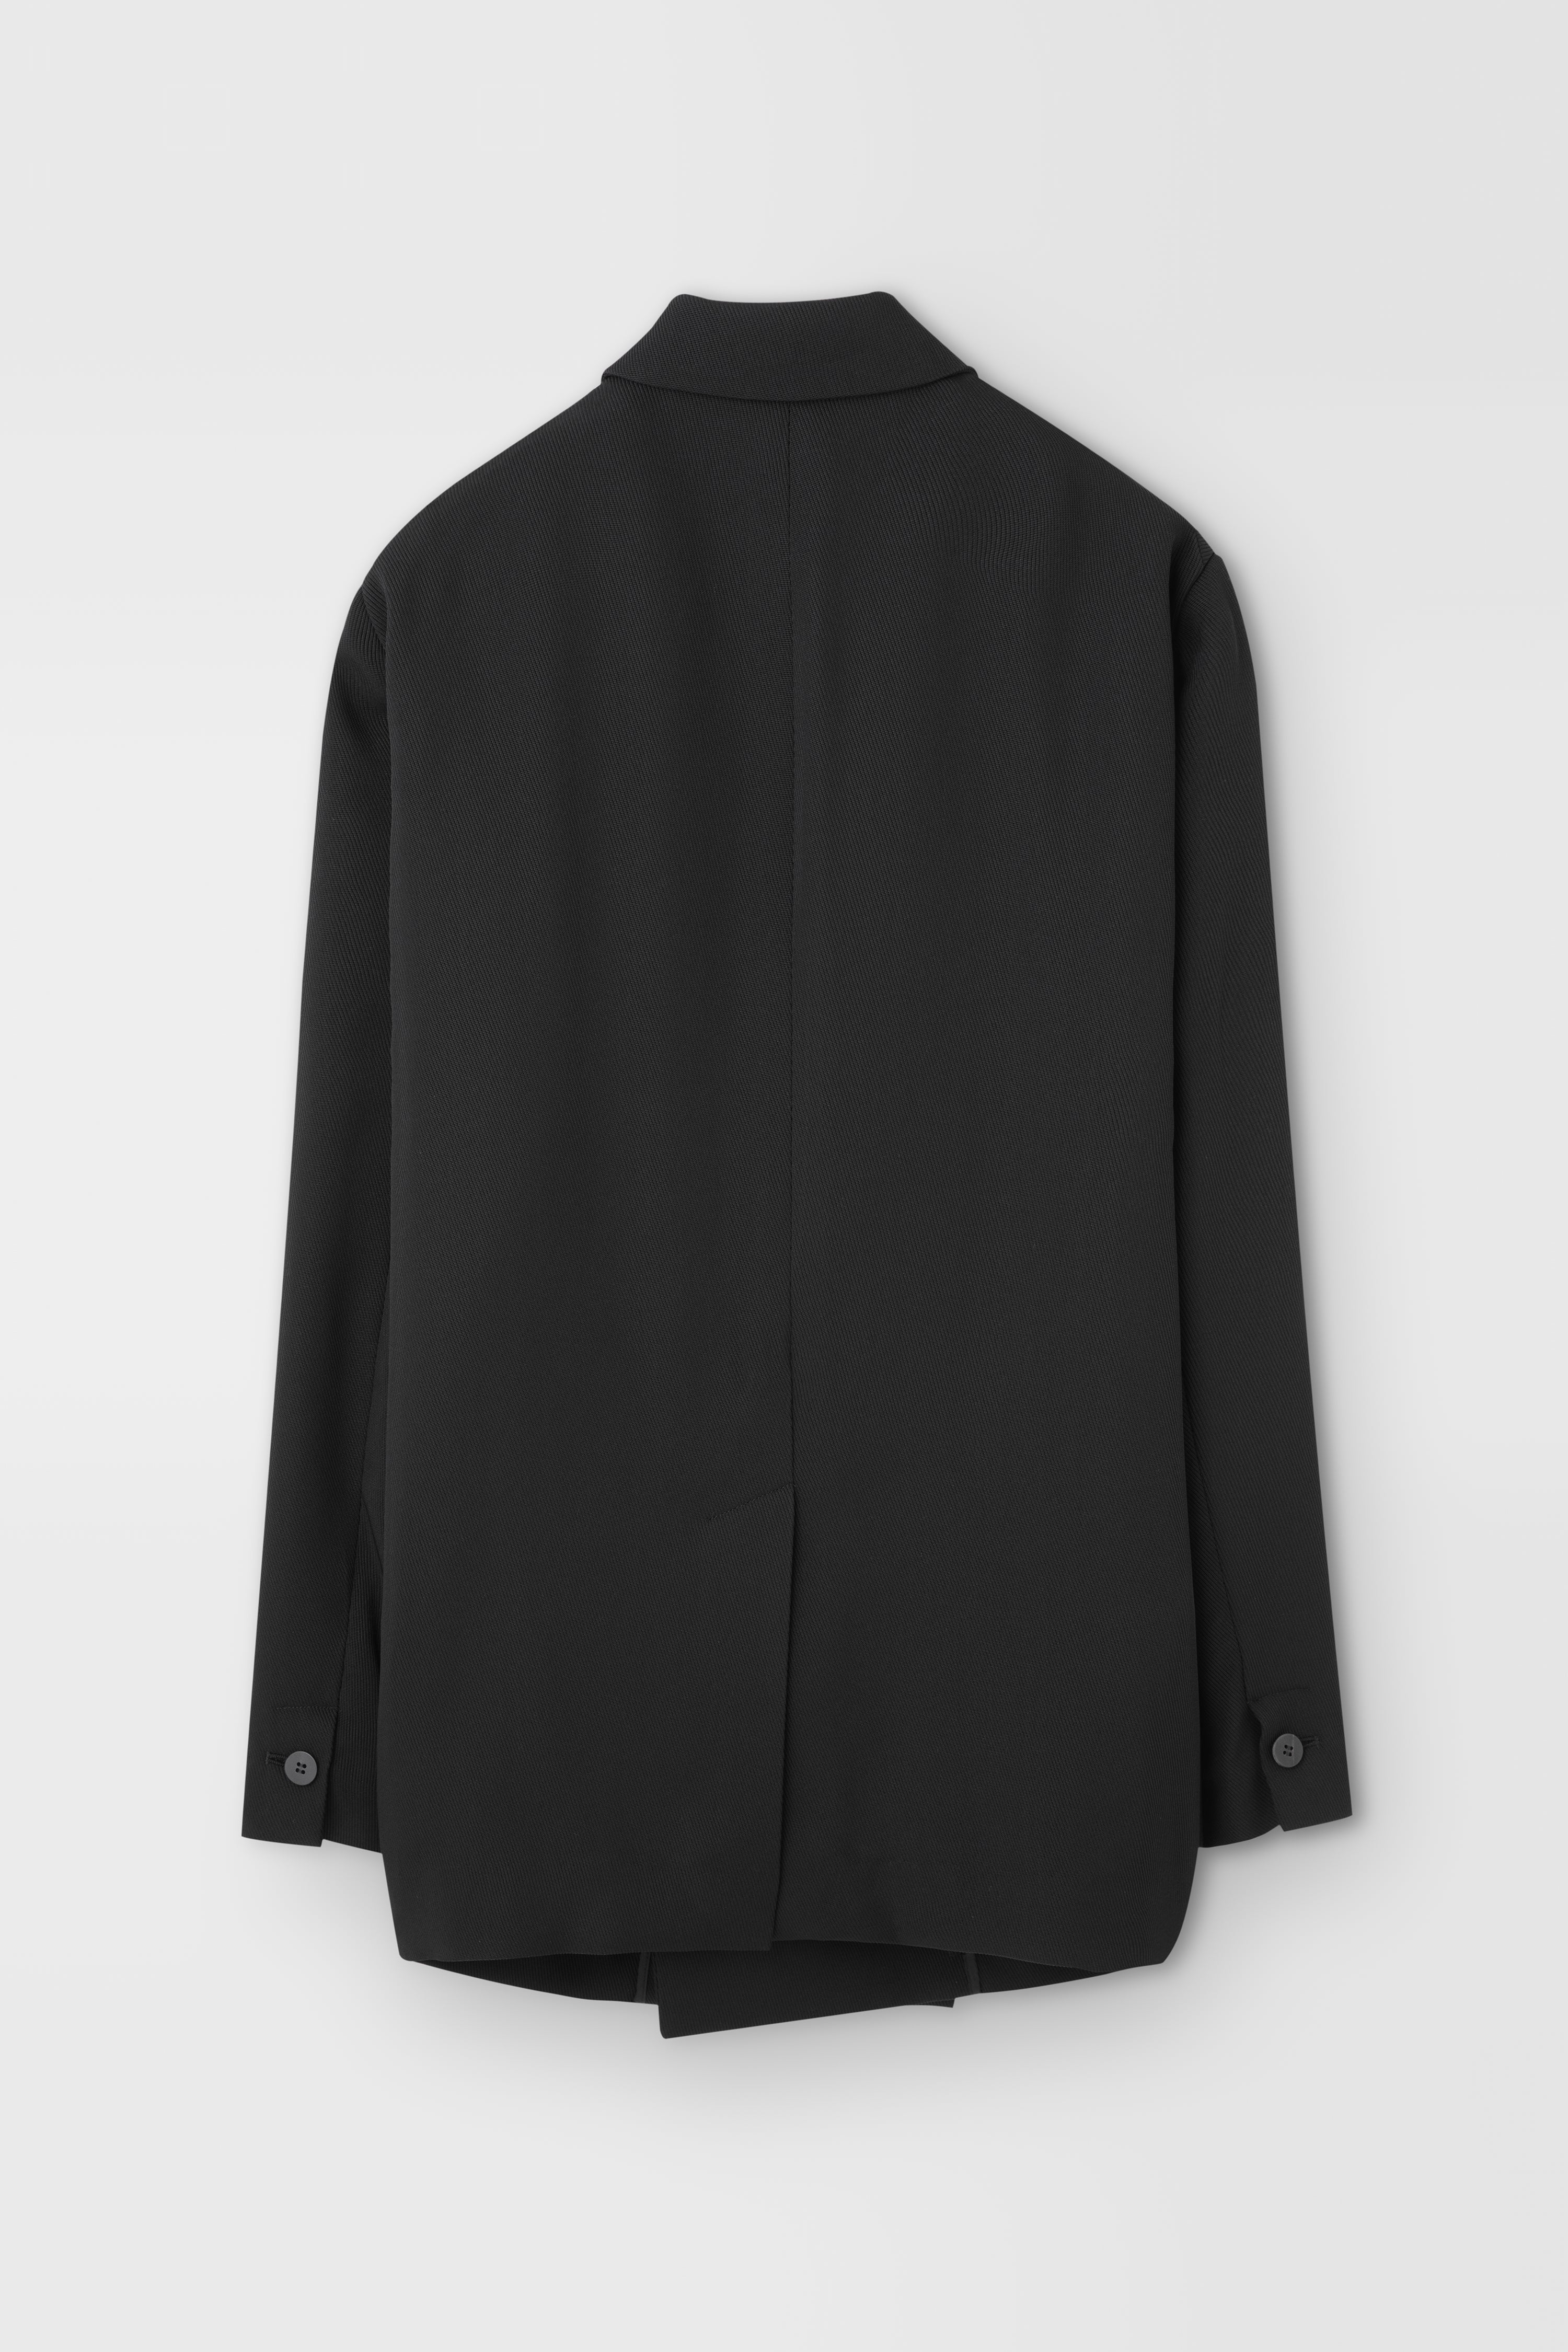 Classic Rayon Tricotine Double Breasted Jacket in Black